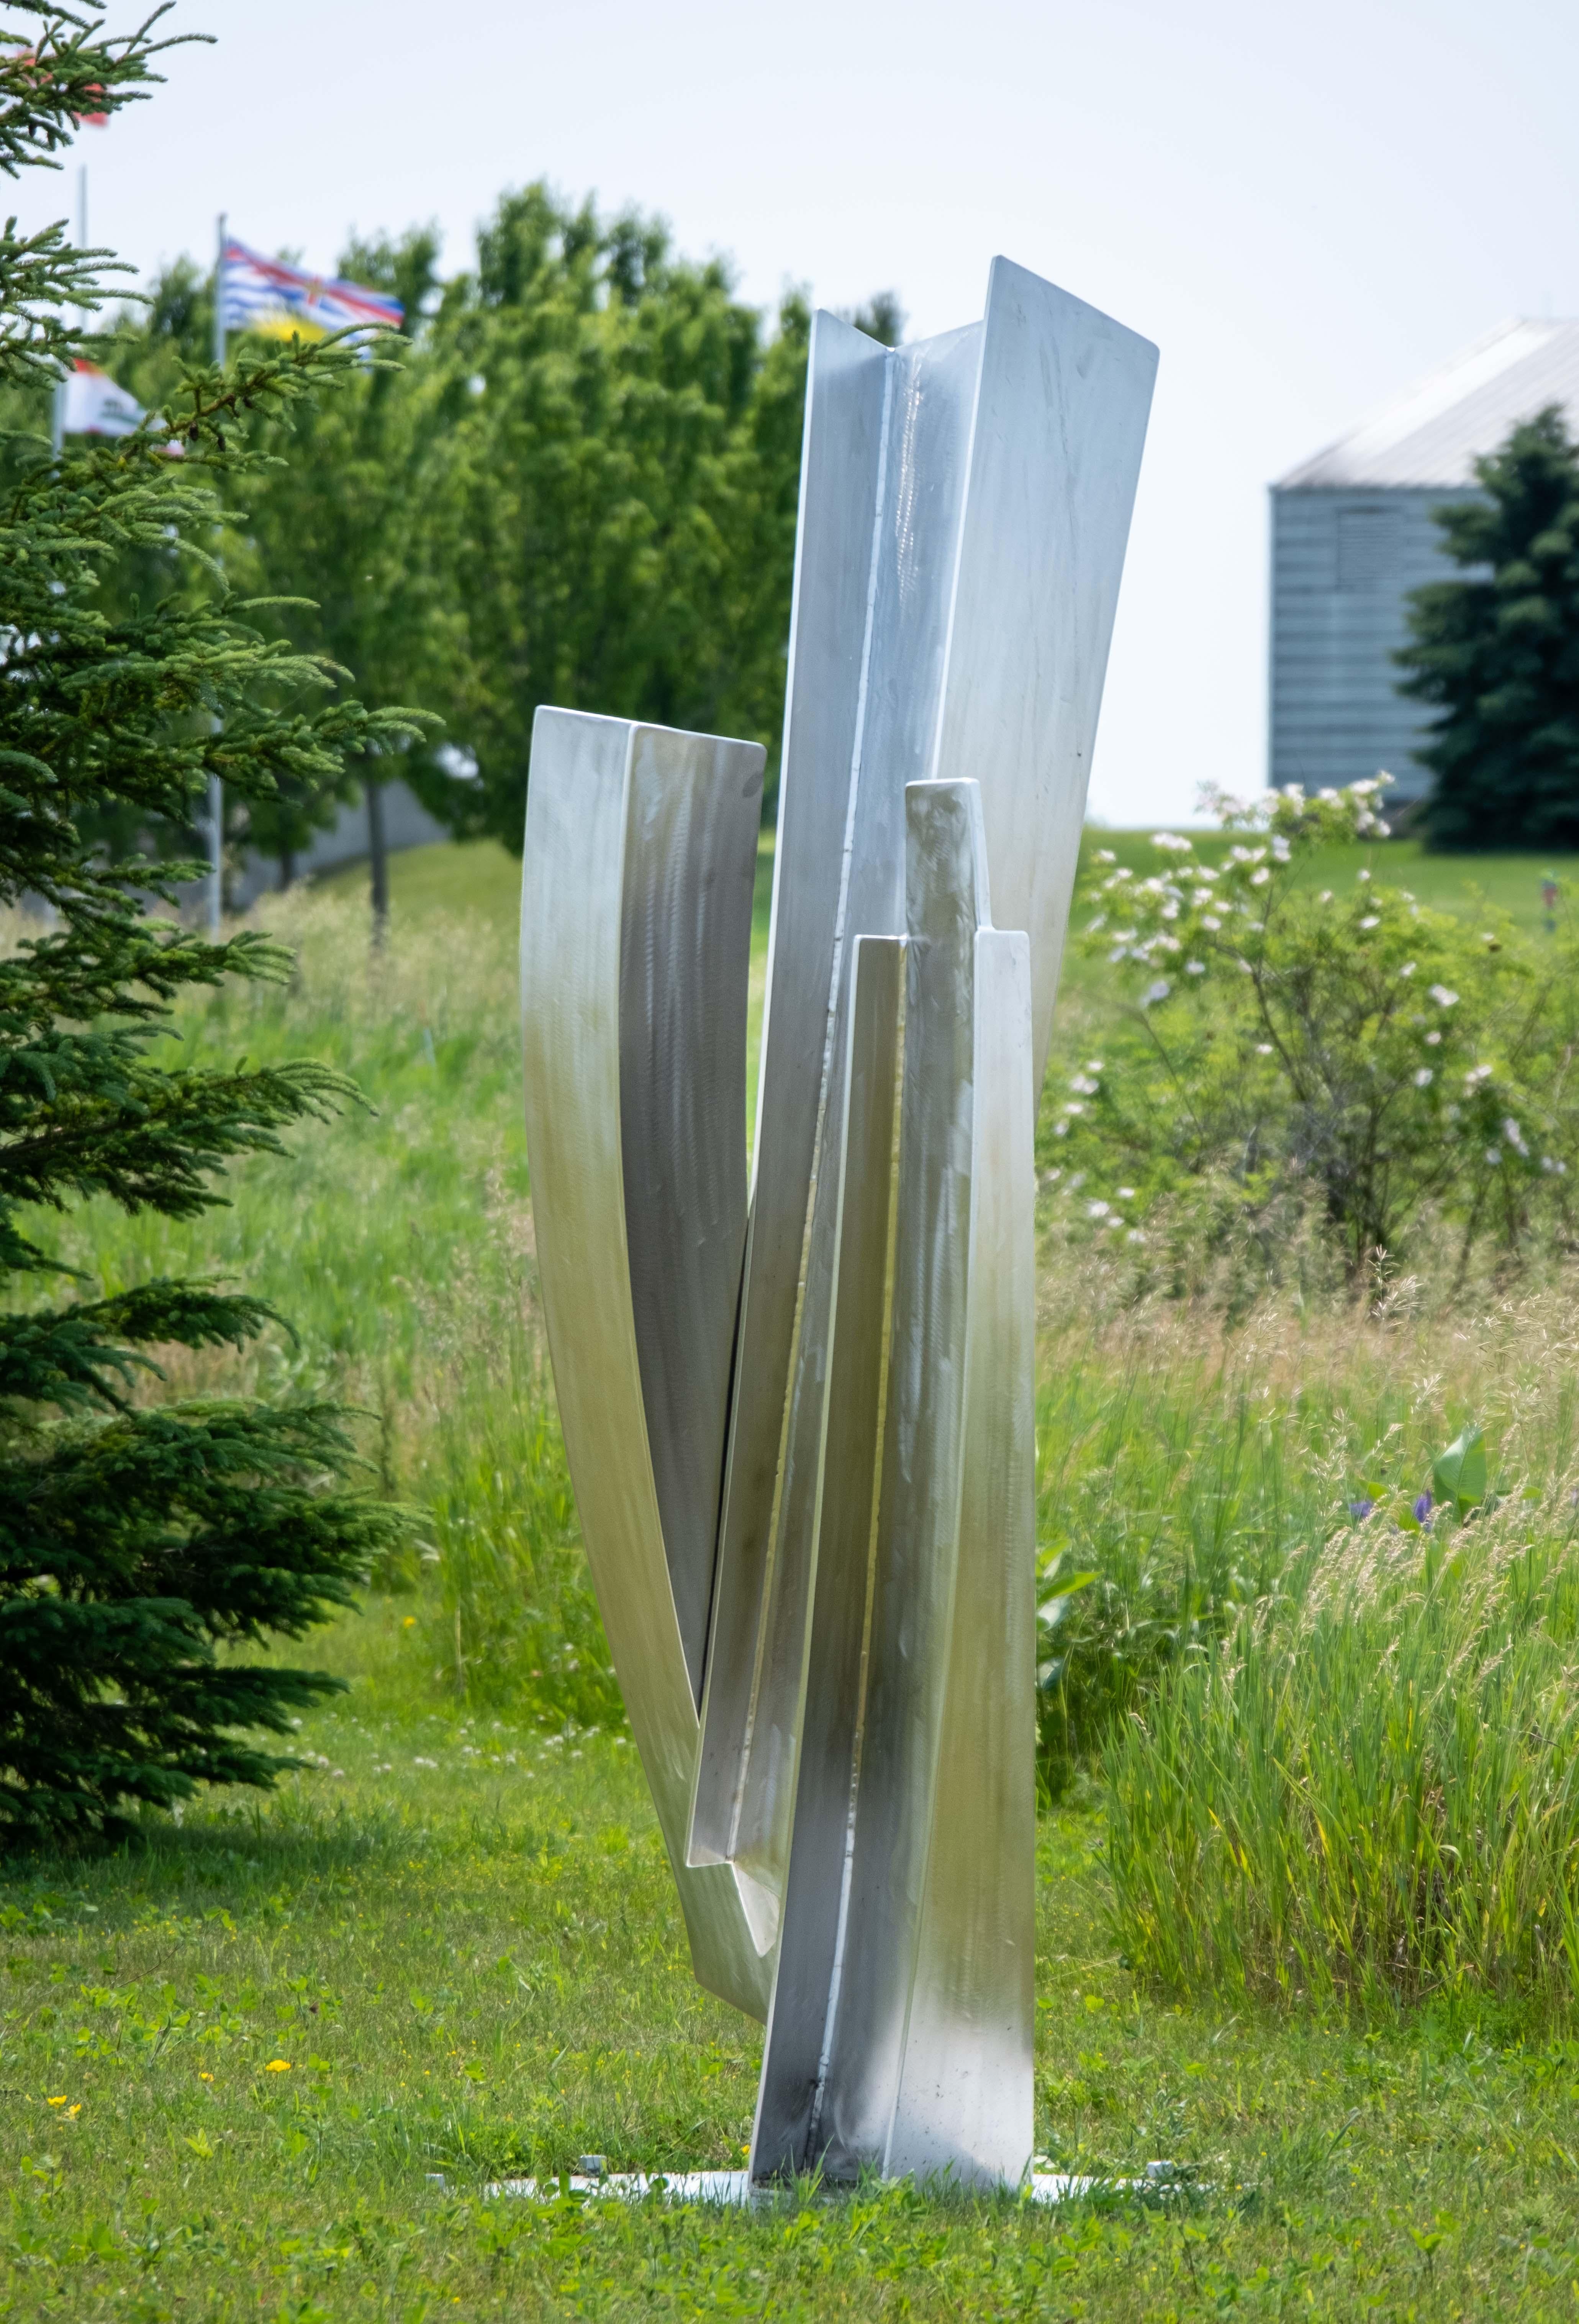 The graceful arc of a dancer in motion is emulated in the fluid form of this elegant sculpture by Claude Millette. Three attached curved columns of polished stainless steel appear to almost float in mid-air. The Quebec artist whose career spans four